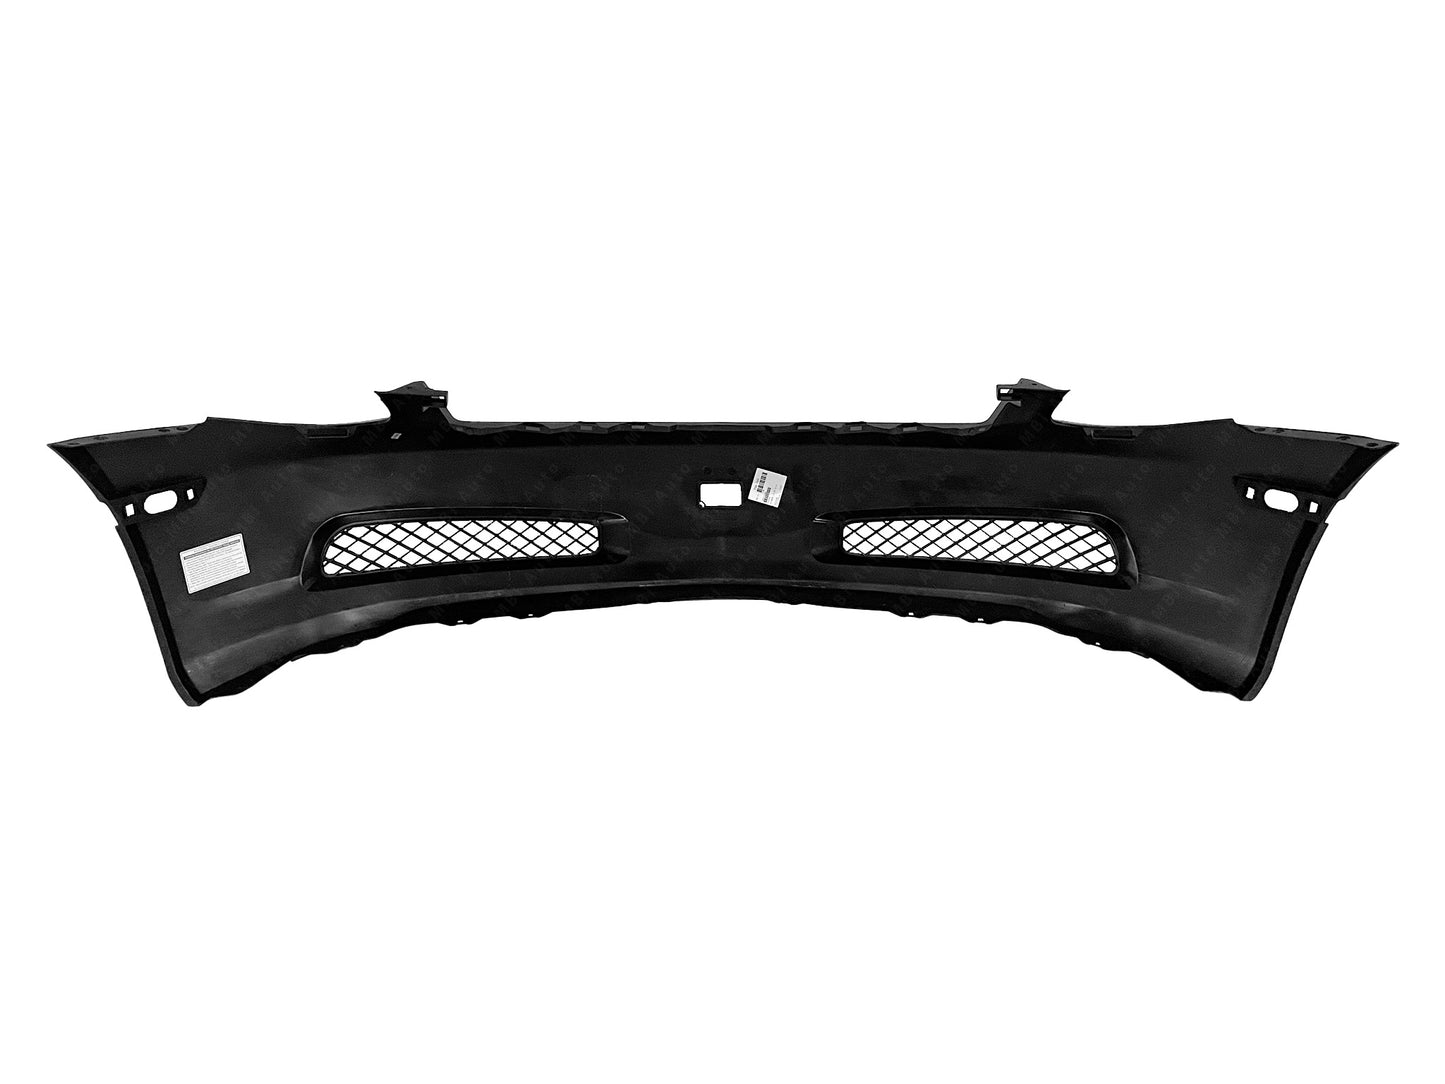 Infiniti G35 Coupe 2003 - 2007 Front Bumper Cover 03 - 07 IN1000122 Bumper-King